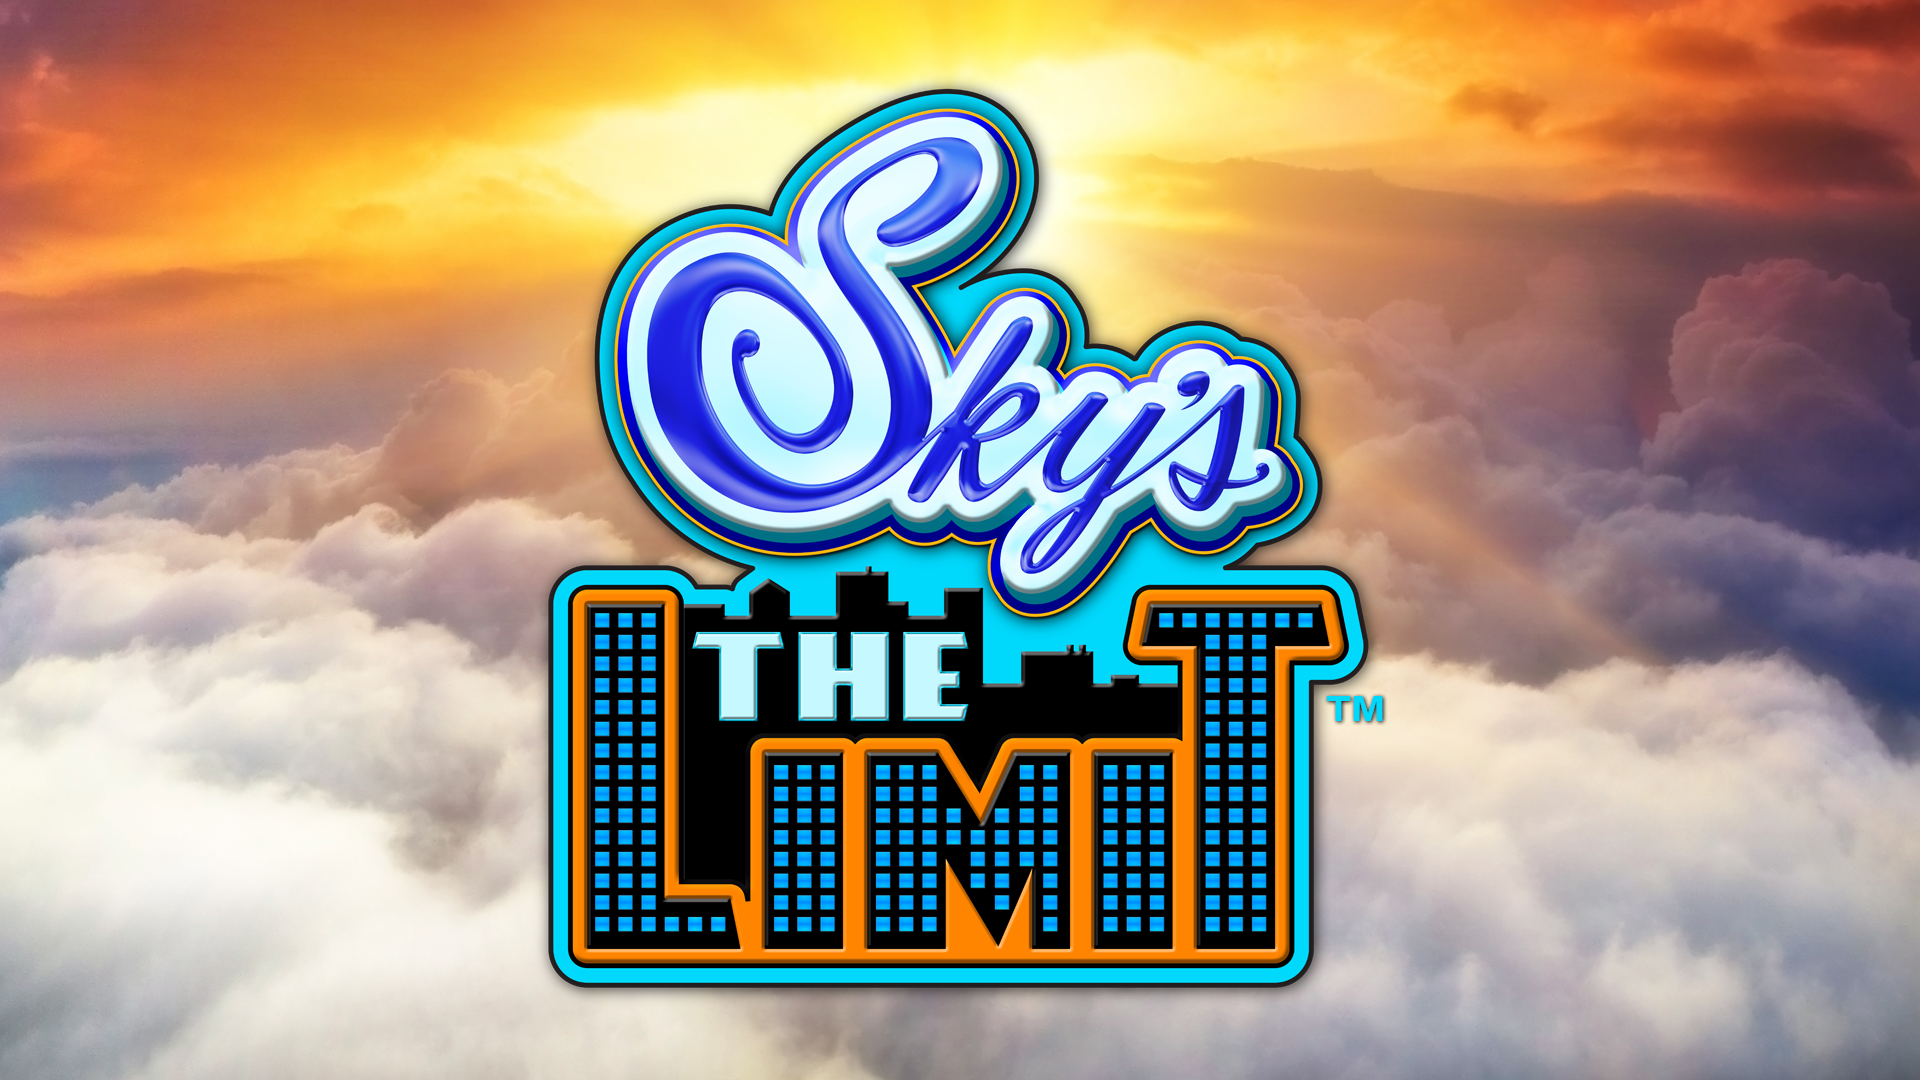 splash_screen_skys_the_limit.png